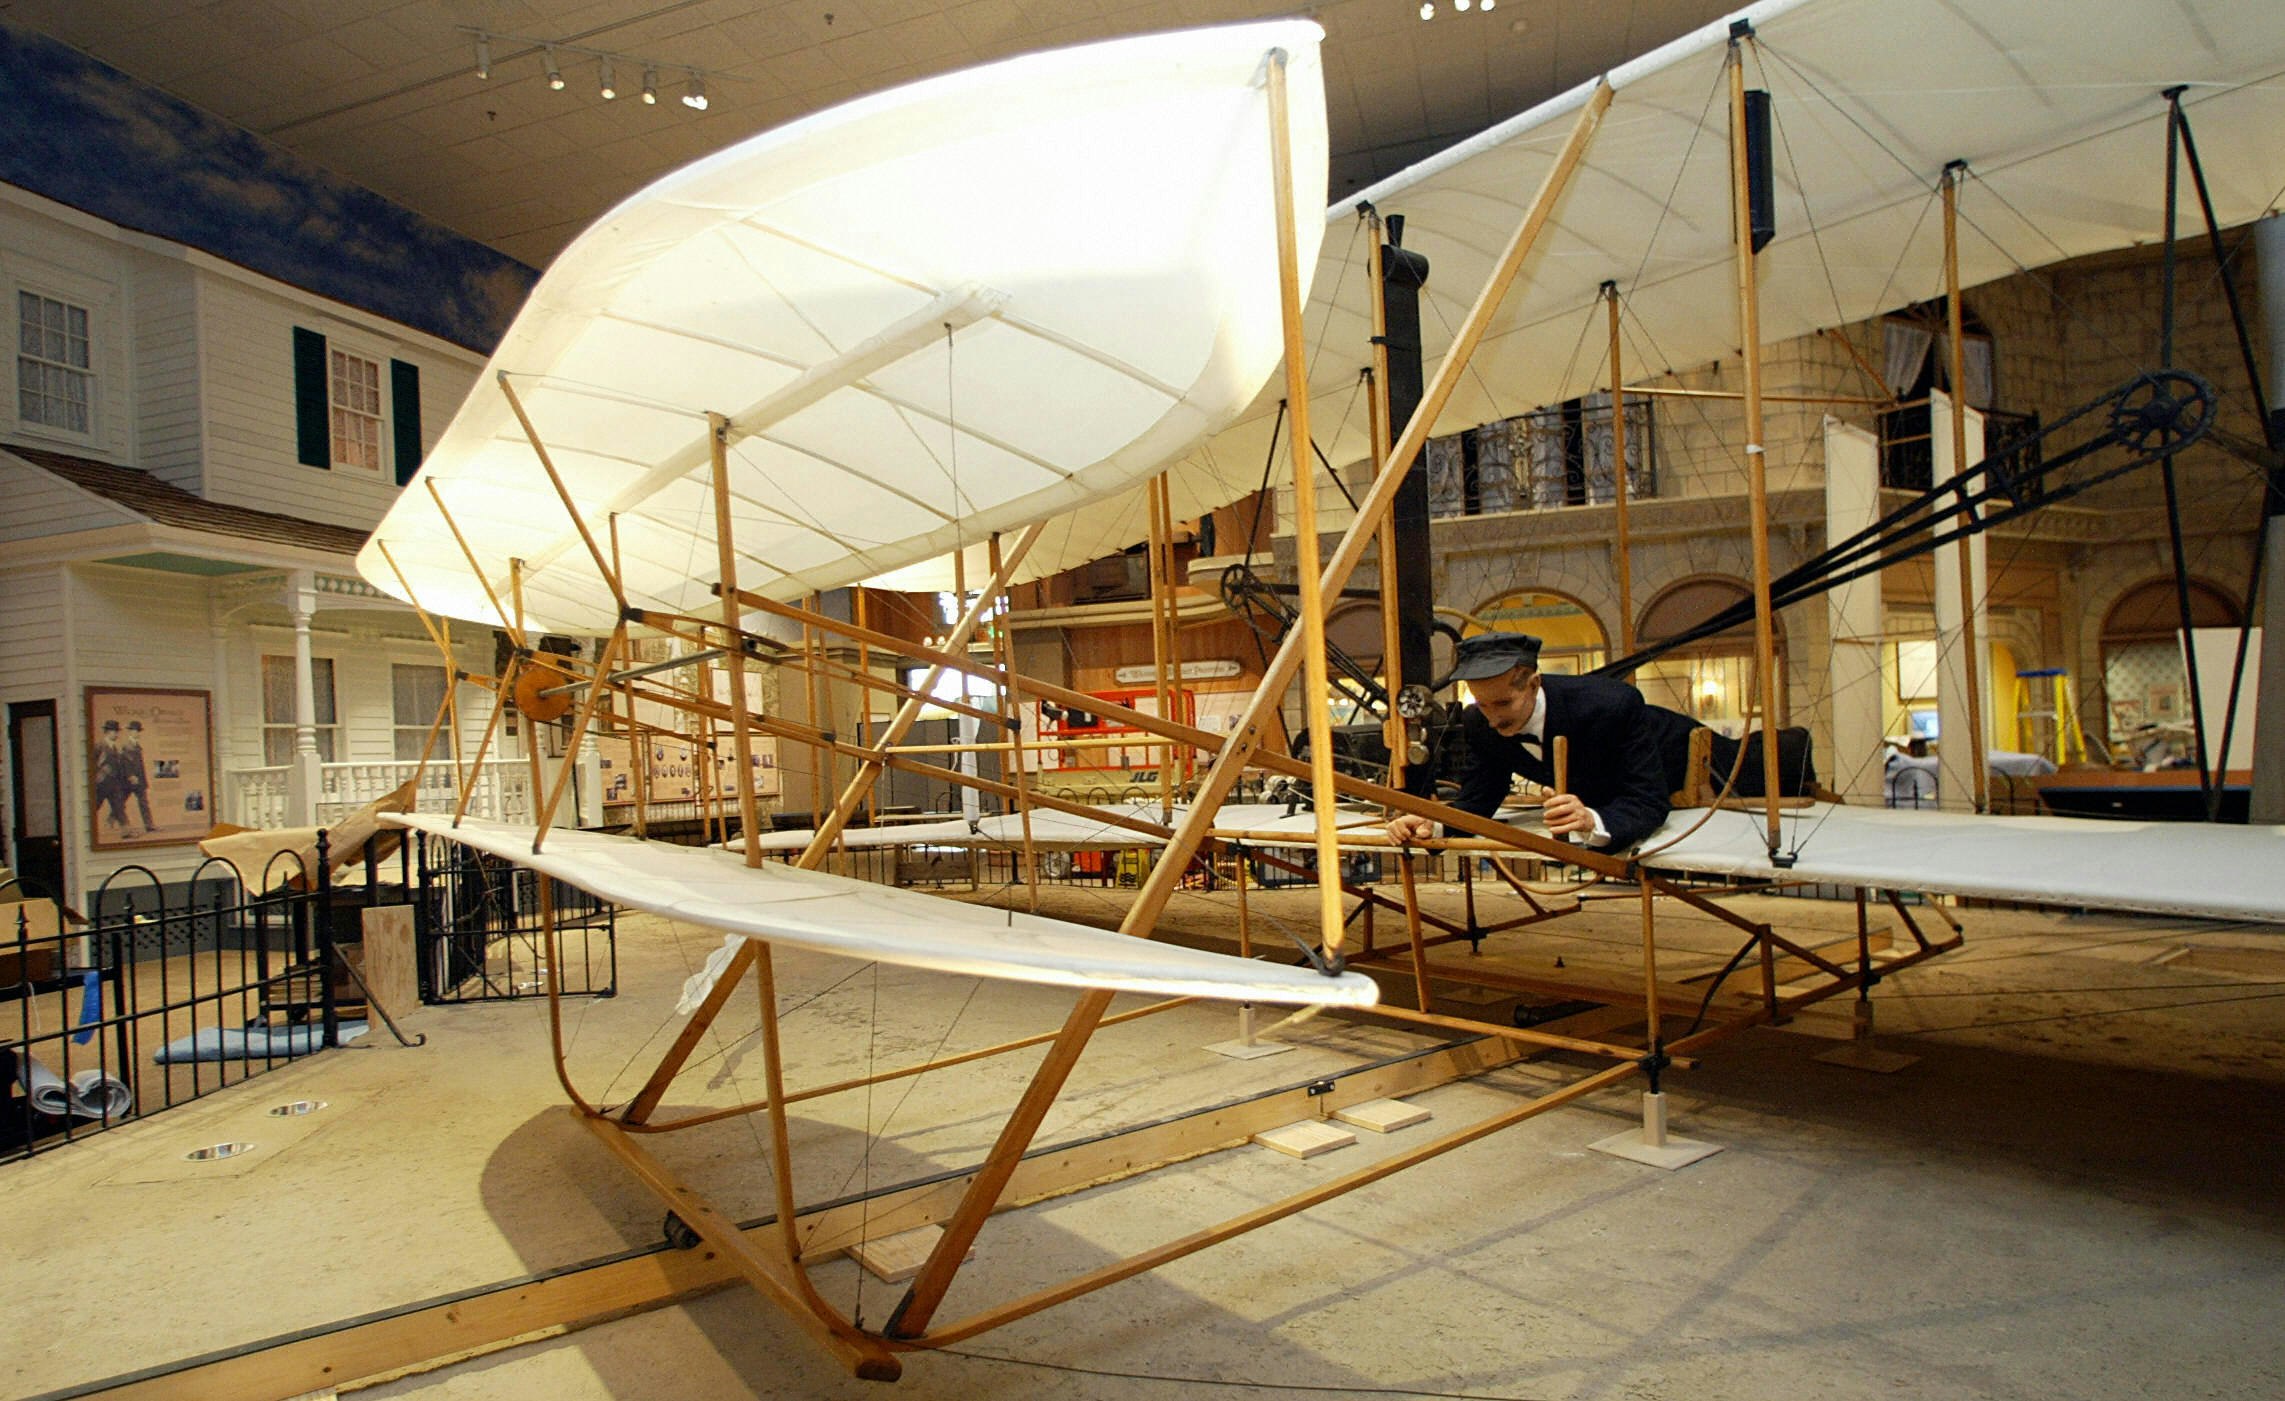 The 1903 Wright Flyer, the world's first airplane, on display at the Smithsonian's National Air and Space Museum in Washington, DC. It is made of light-colored wood slats with white material covering the wings. A mannequin lays belly-down on the plane as if about to take off. 